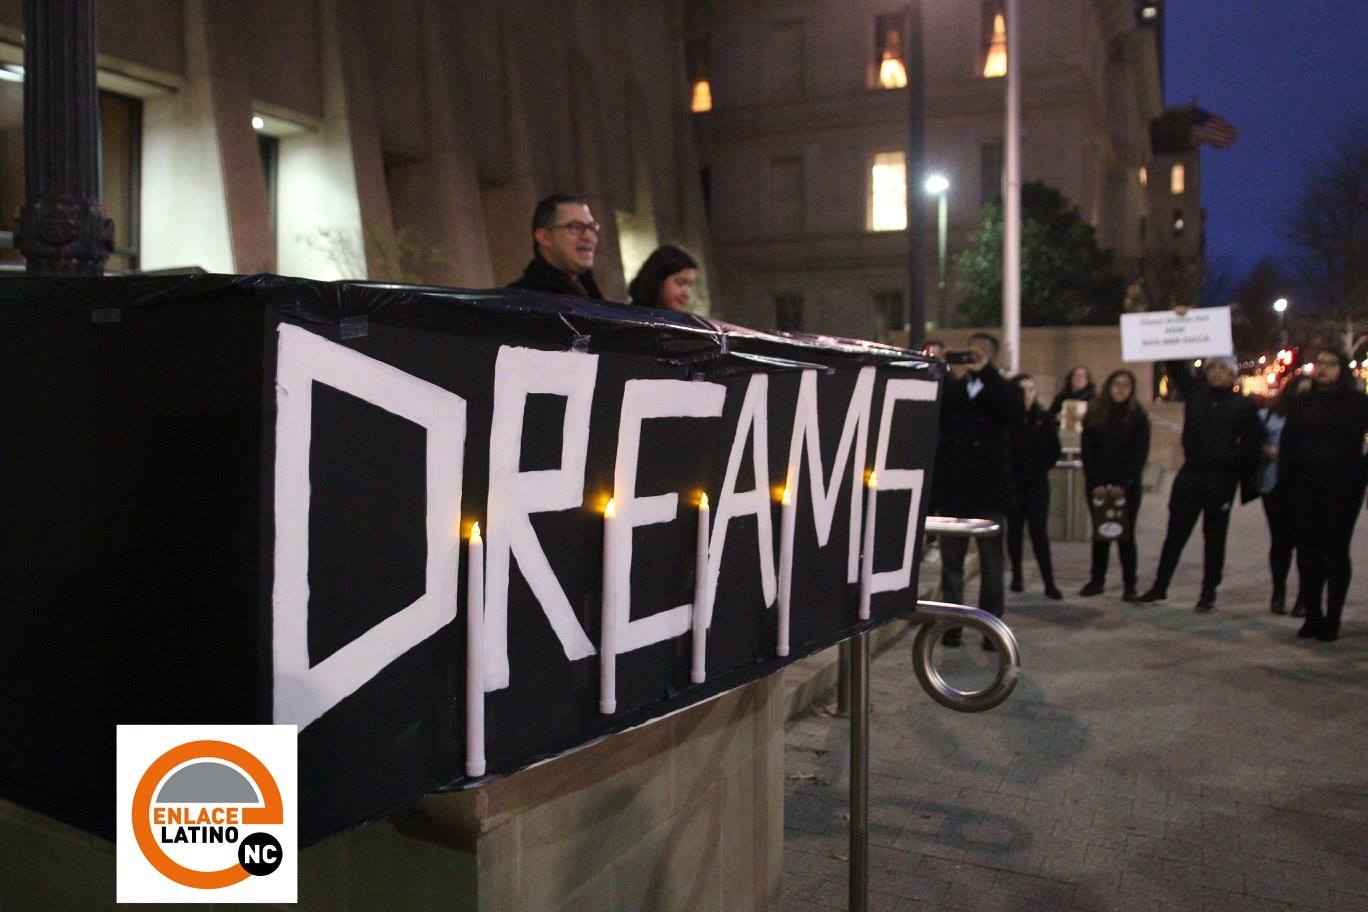 Dream Act Now youth